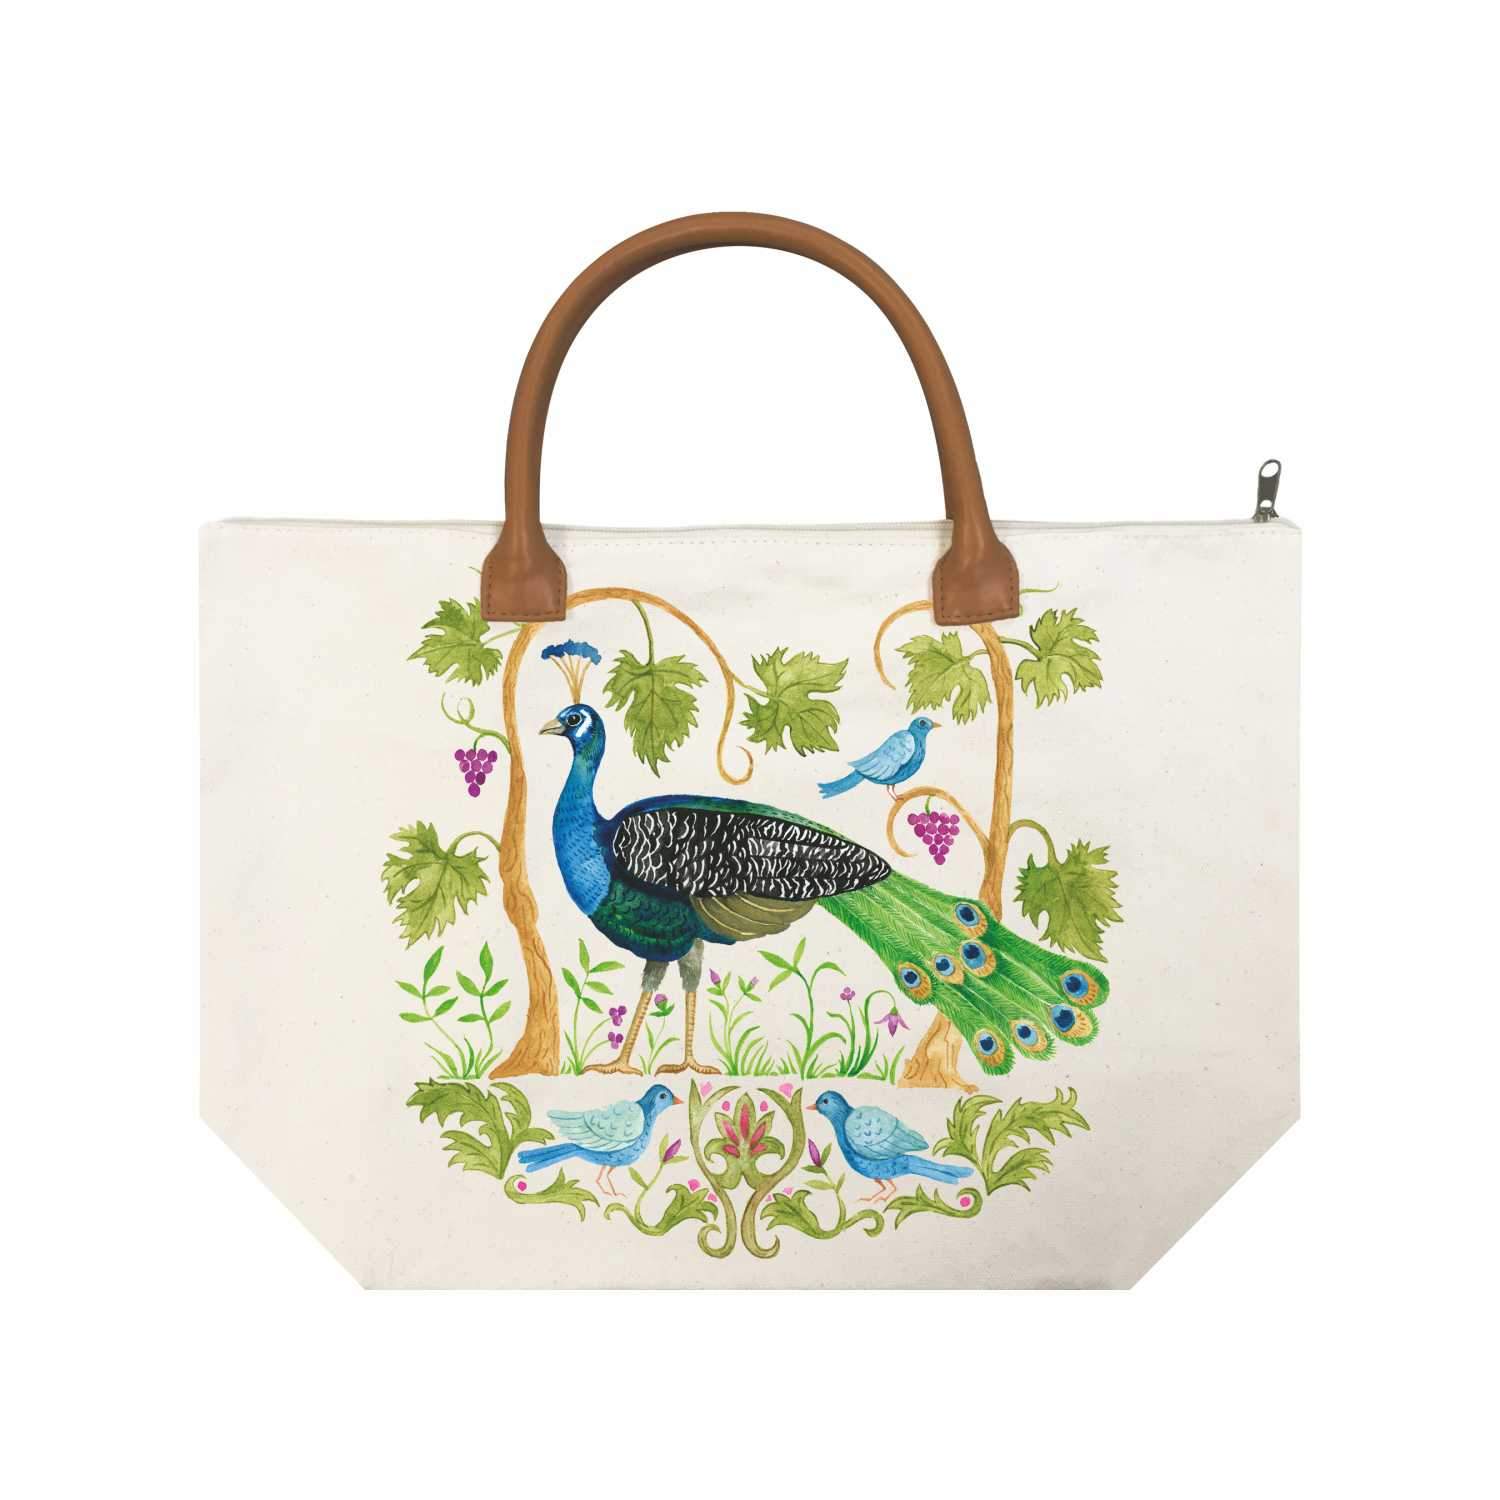 Hand-painted Leather Peacock Tote Bag